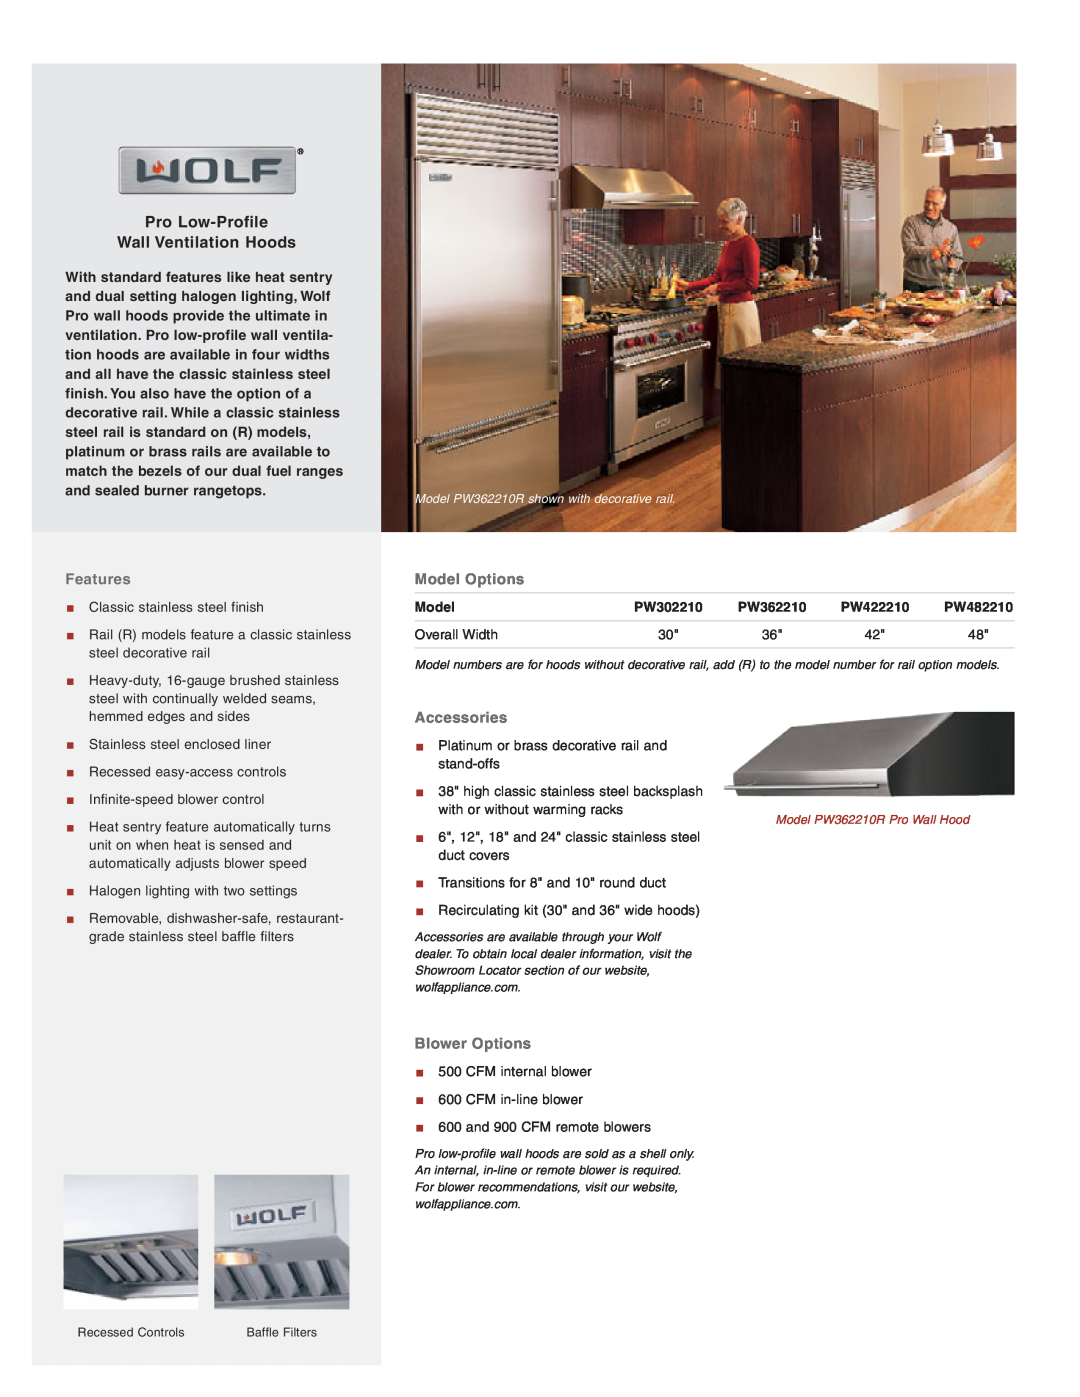 Wolf Appliance Company PW482210 manual Pro Low-Profile Wall Ventilation Hoods, Features, Model Options, Accessories 